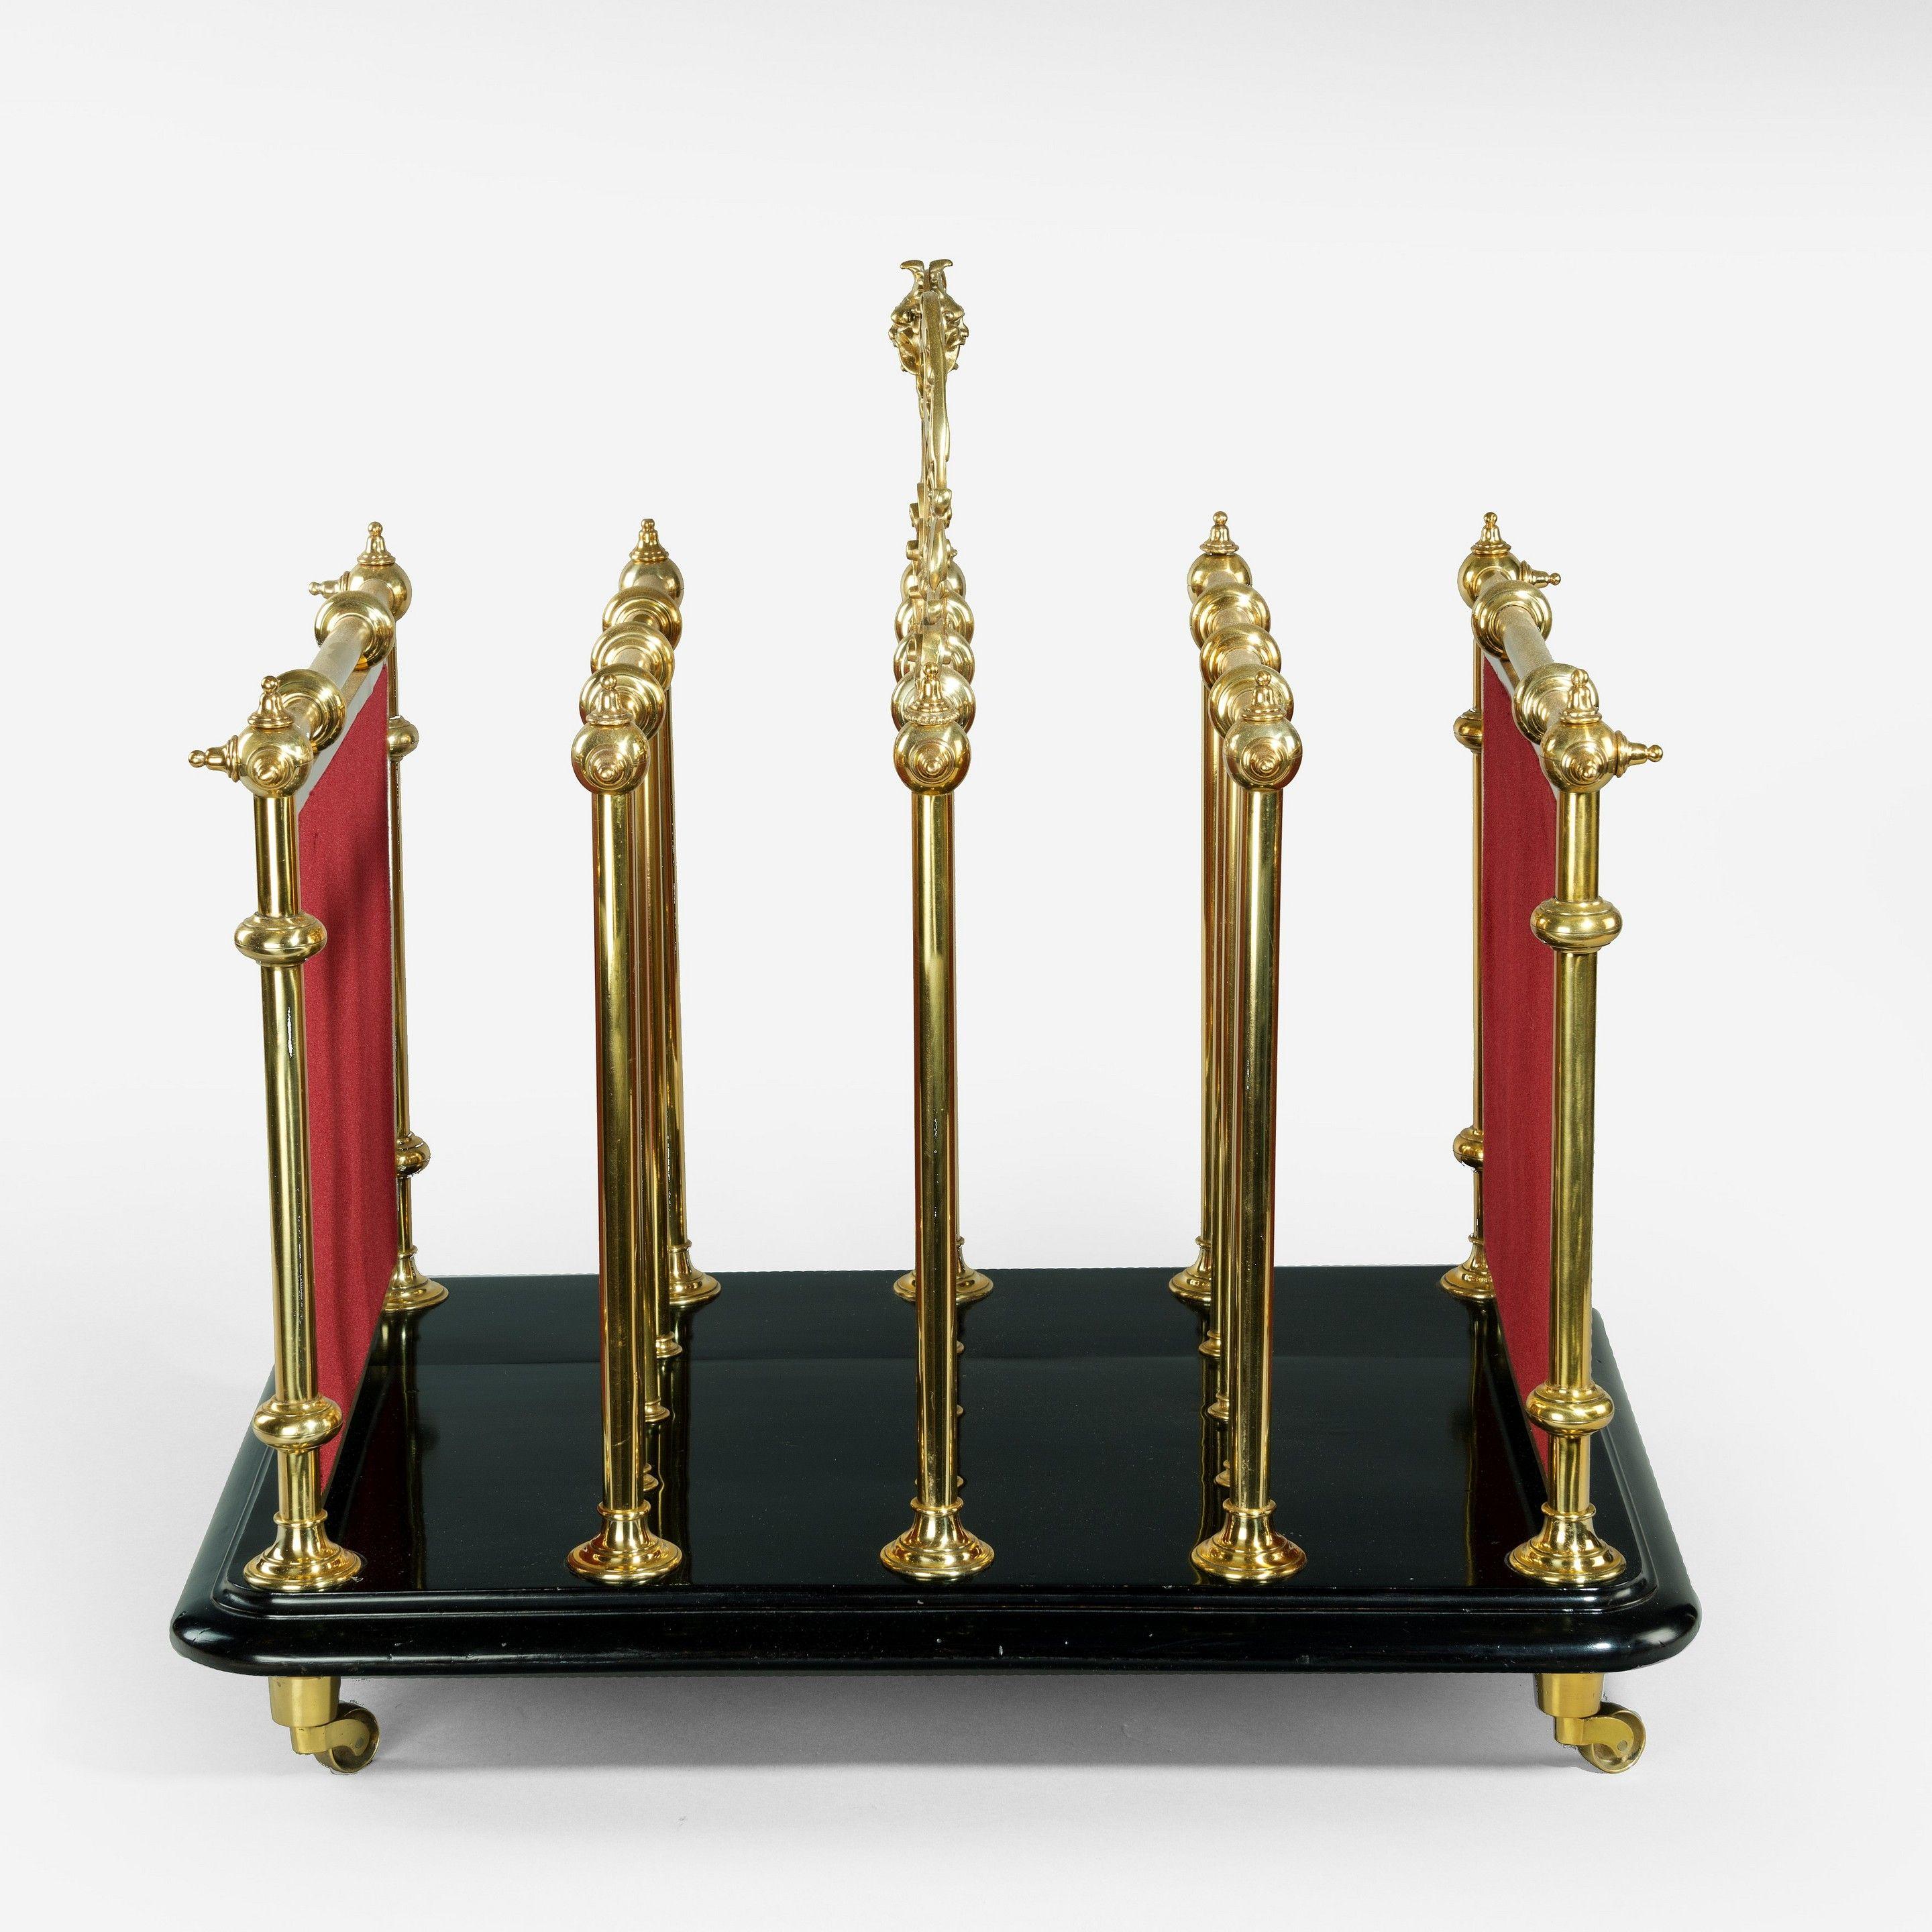 An unusual Victorian brass music Canterbury, of rectangular form with four compartments divided by knopped brass frames, the central one surmounted by an ornate openwork carrying handle, the solid ends applied with engraved, openwork lyres on